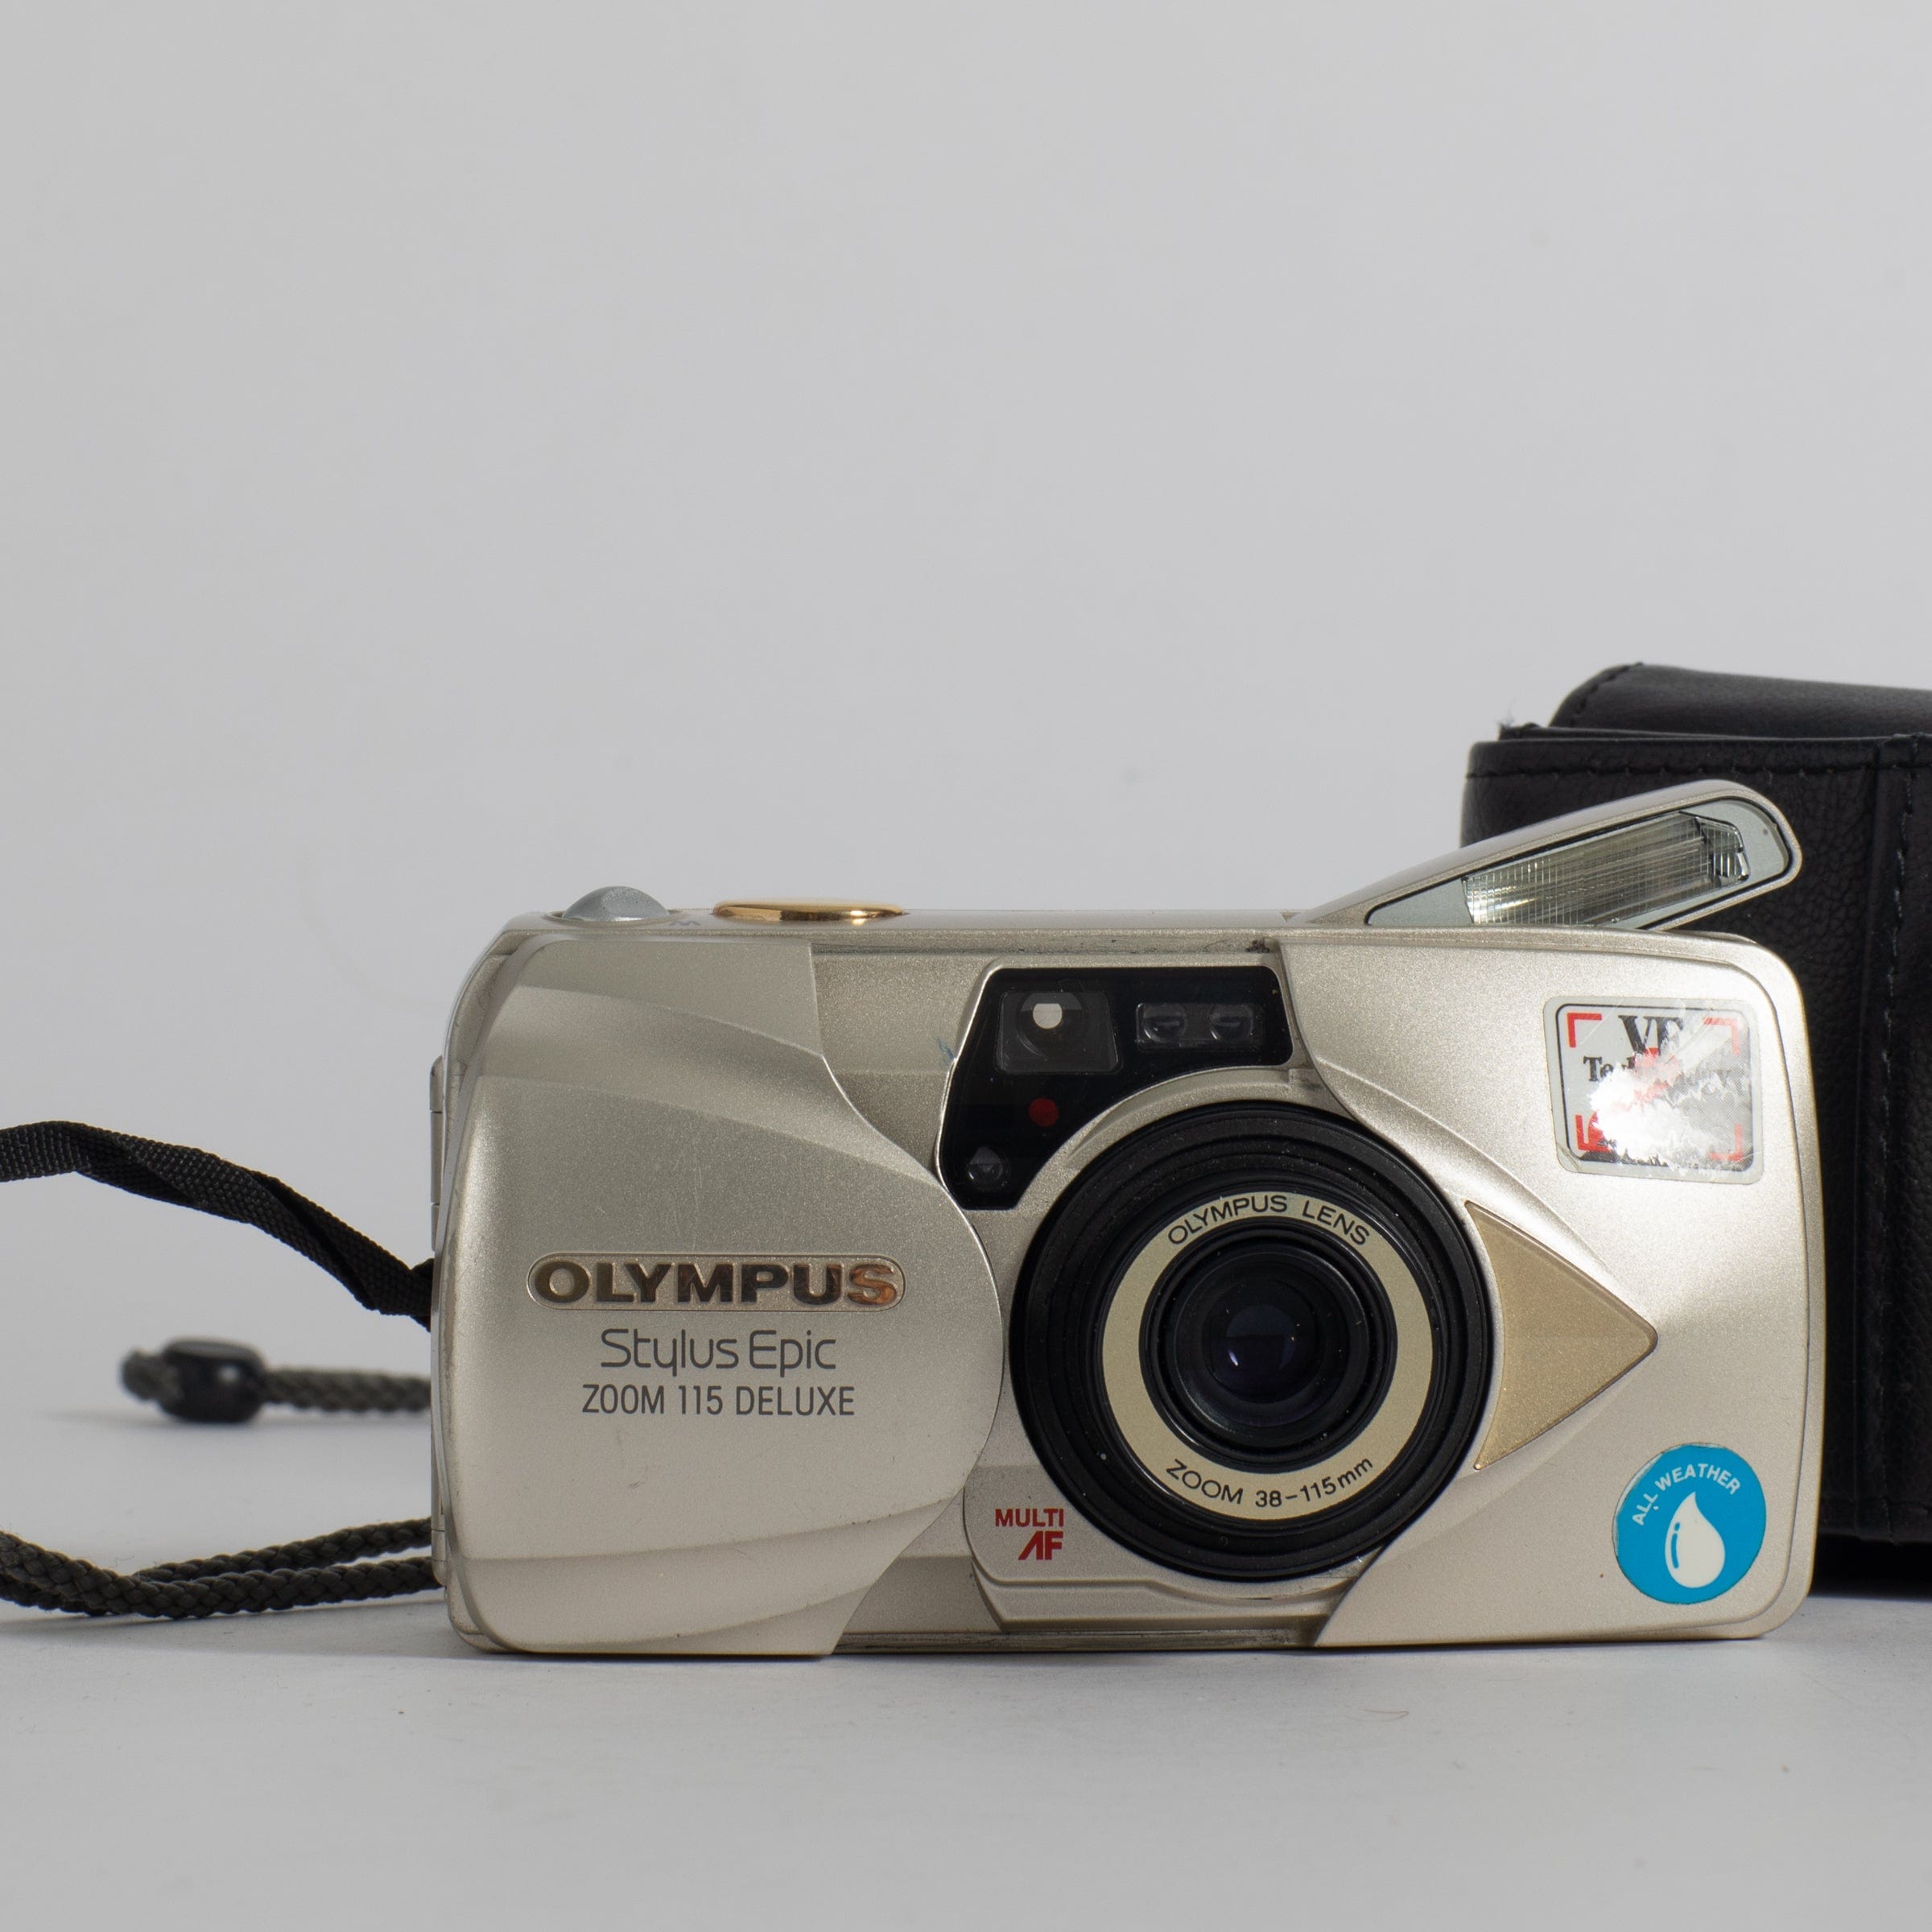 Olympus Stylus Epic Zoom 115 Deluxe VF (film tested) – Film Supply 